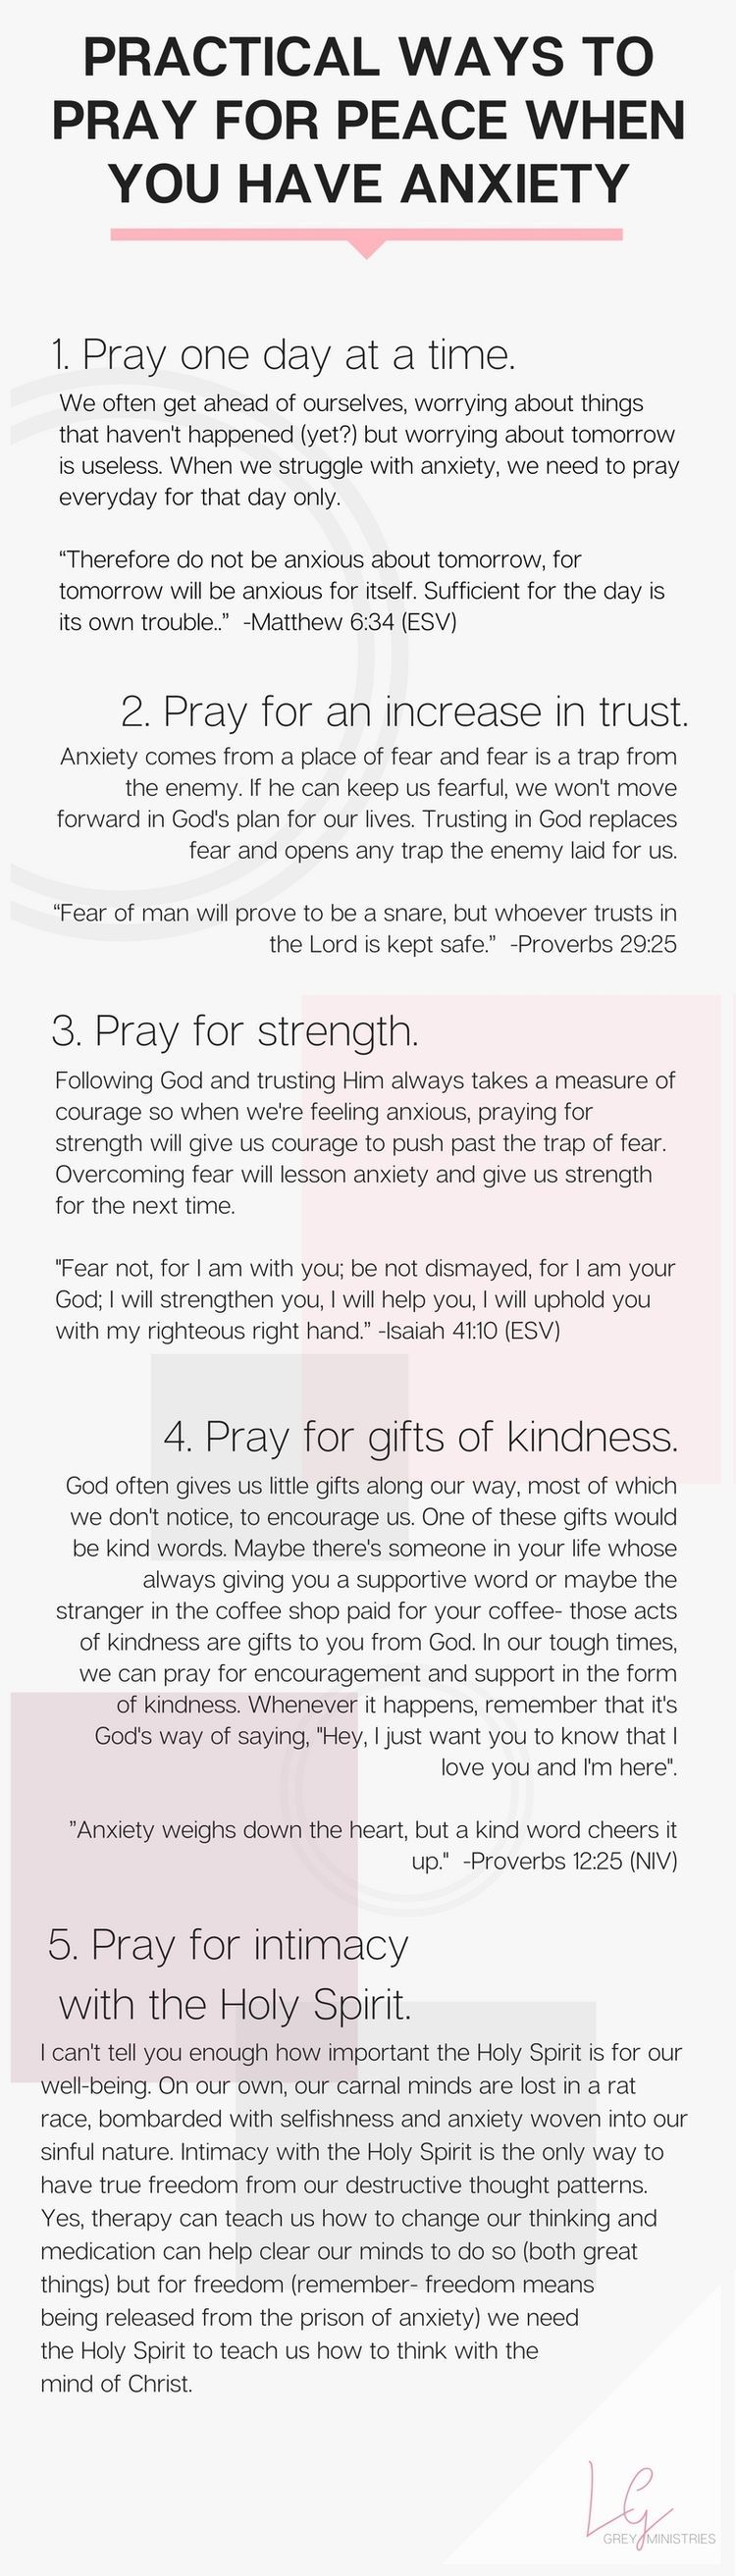 Five prayers to pray for when you’re struggling with anxiety. What does God say about anxiety anyway? Should Christians be